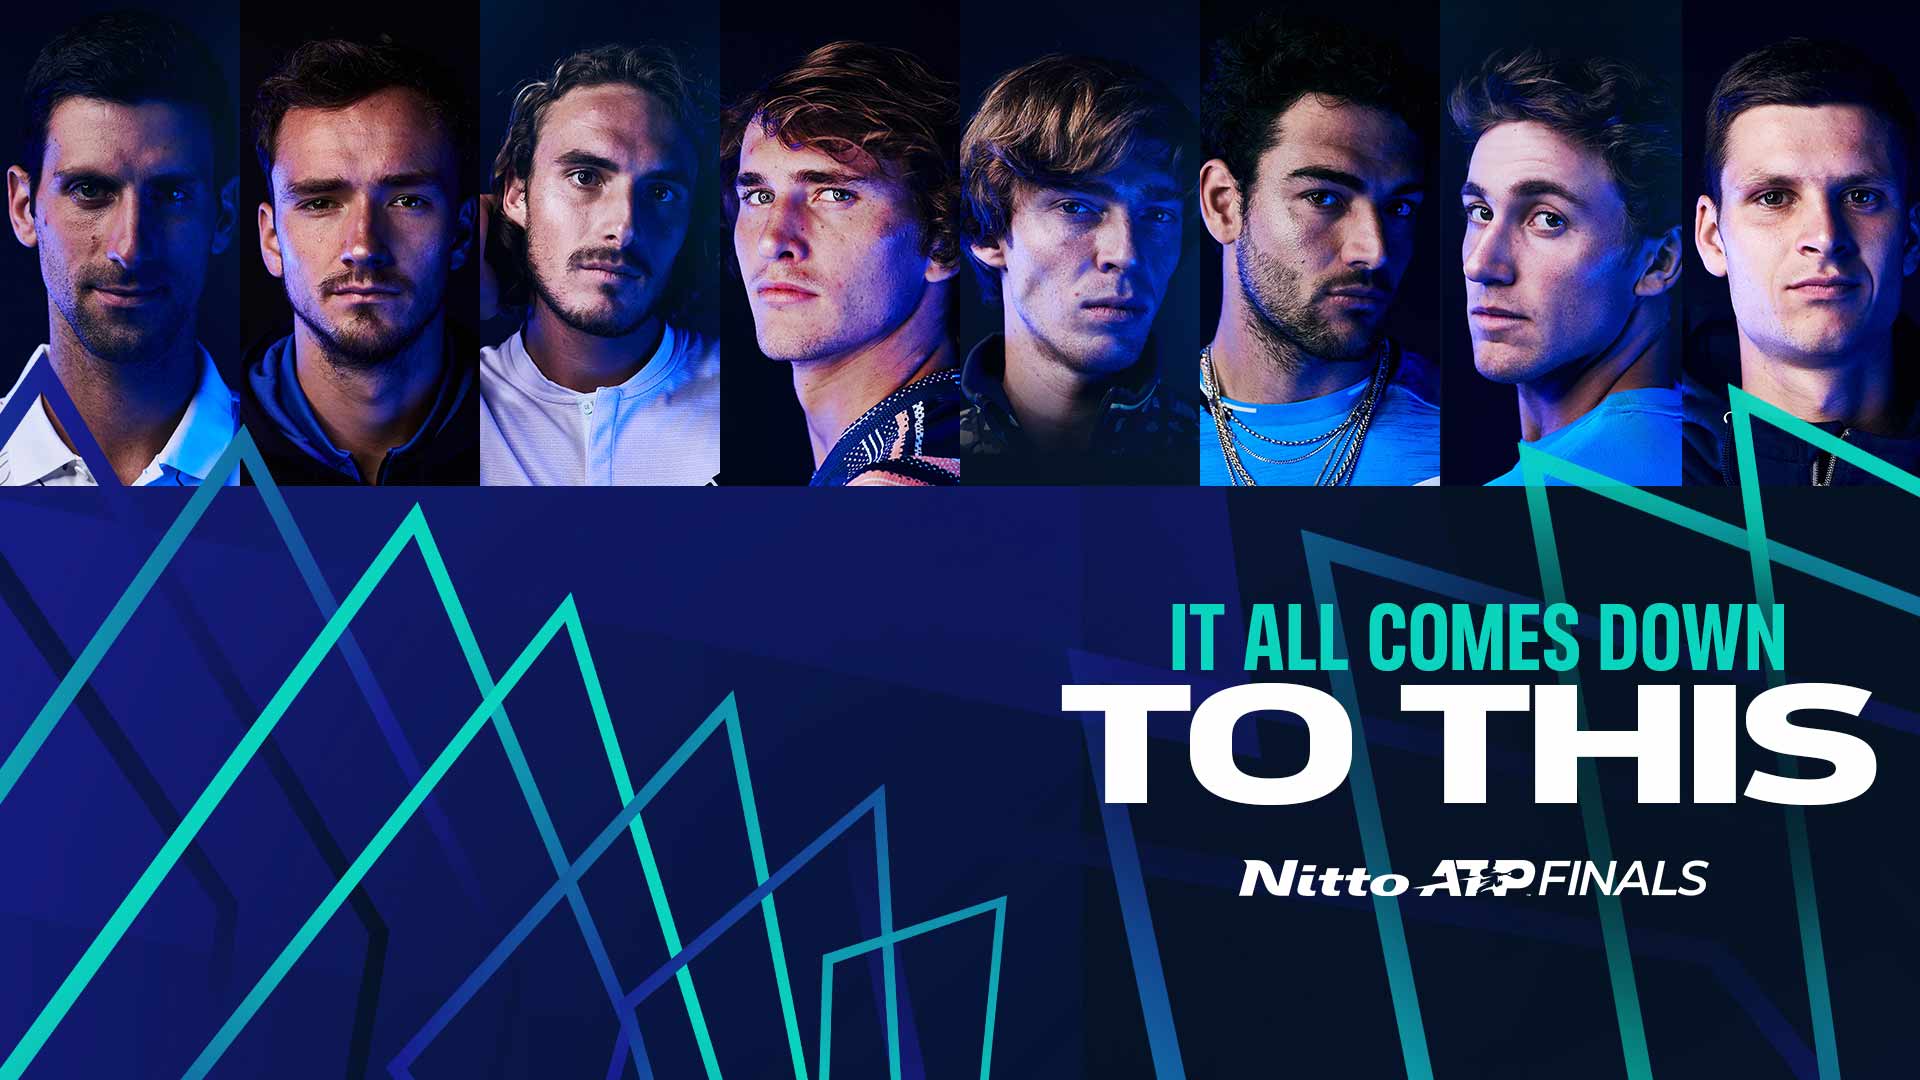 Hurkacz Completes 2021 Nitto ATP Finals Field News Article Nitto ATP Finals Tennis